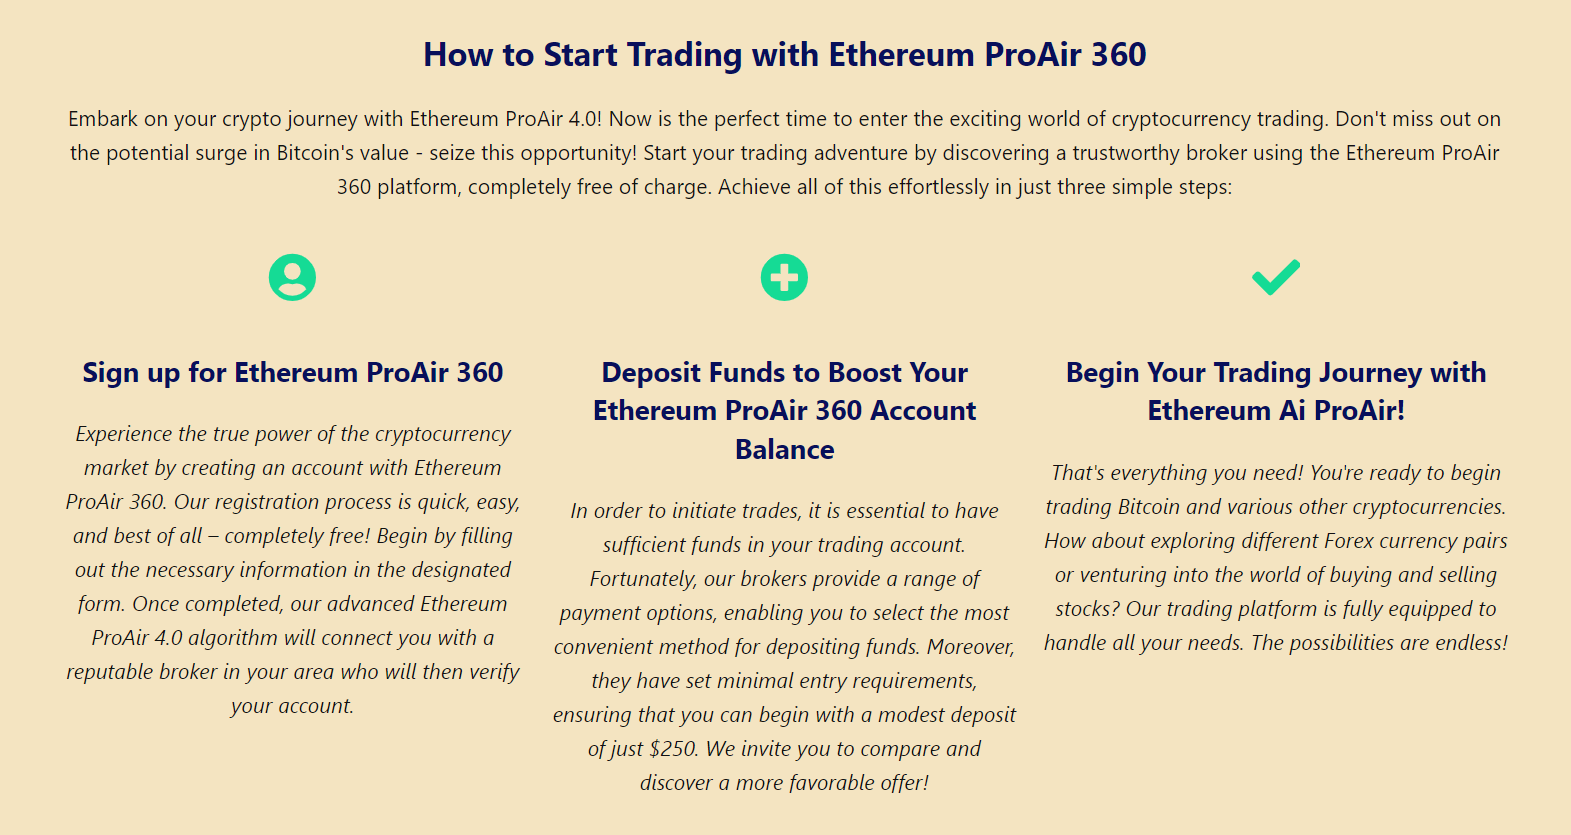 Ethereum ProAir 360 - How to start trading